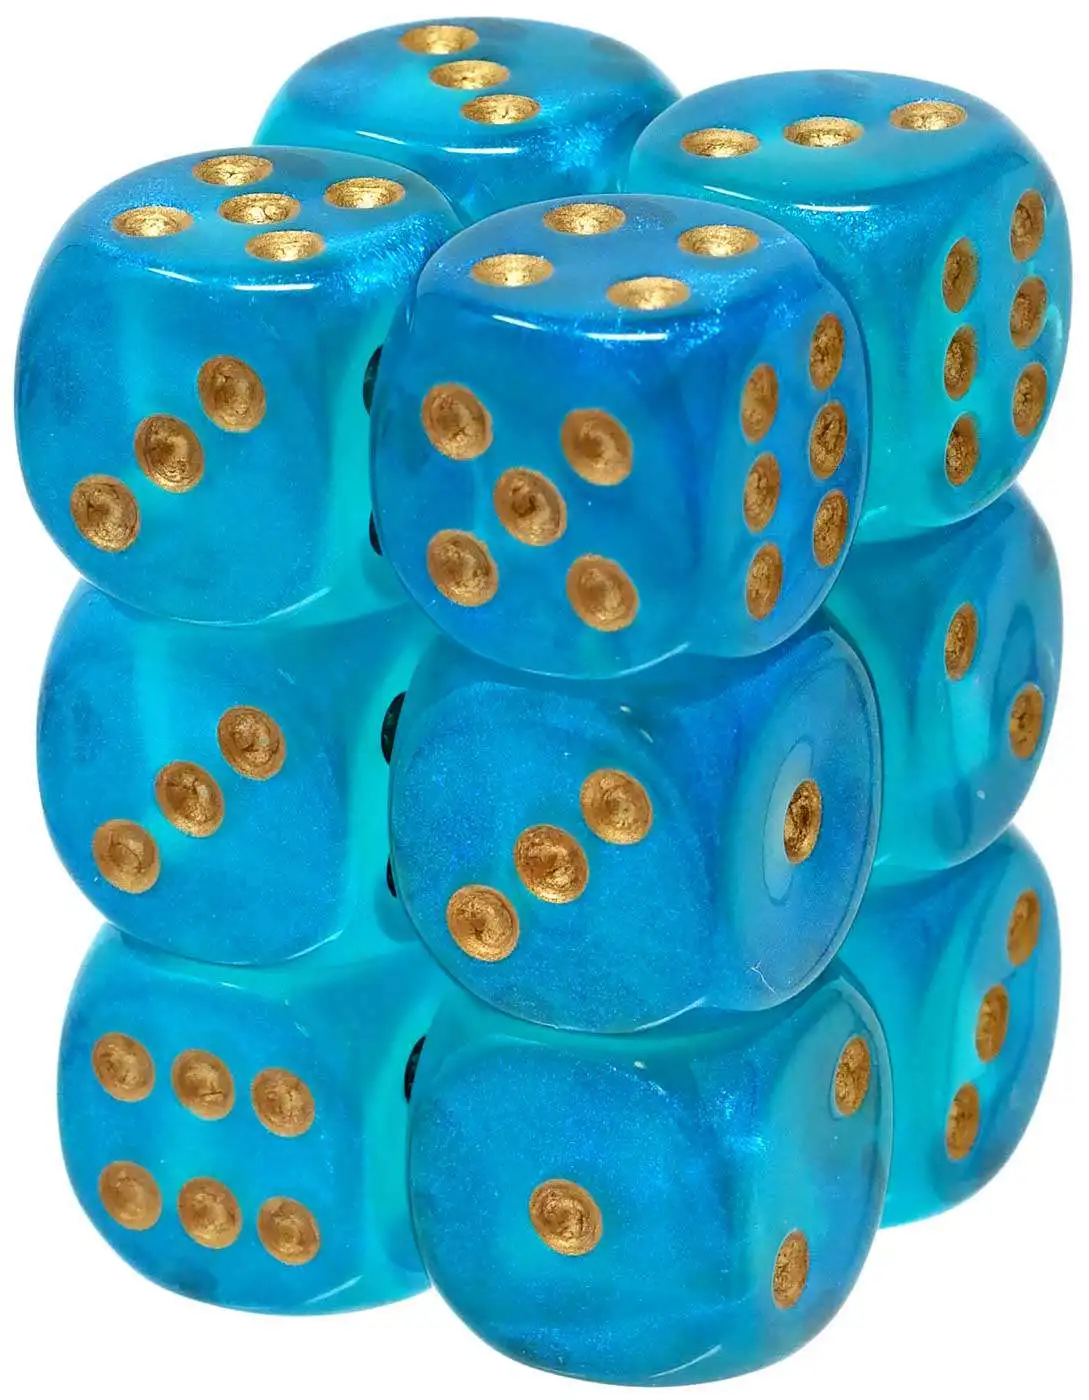 Chessex Dice d6 Set 16mm Borealis Teal w/ Gold Pips 6 Sided Die 12 CHX 27686 